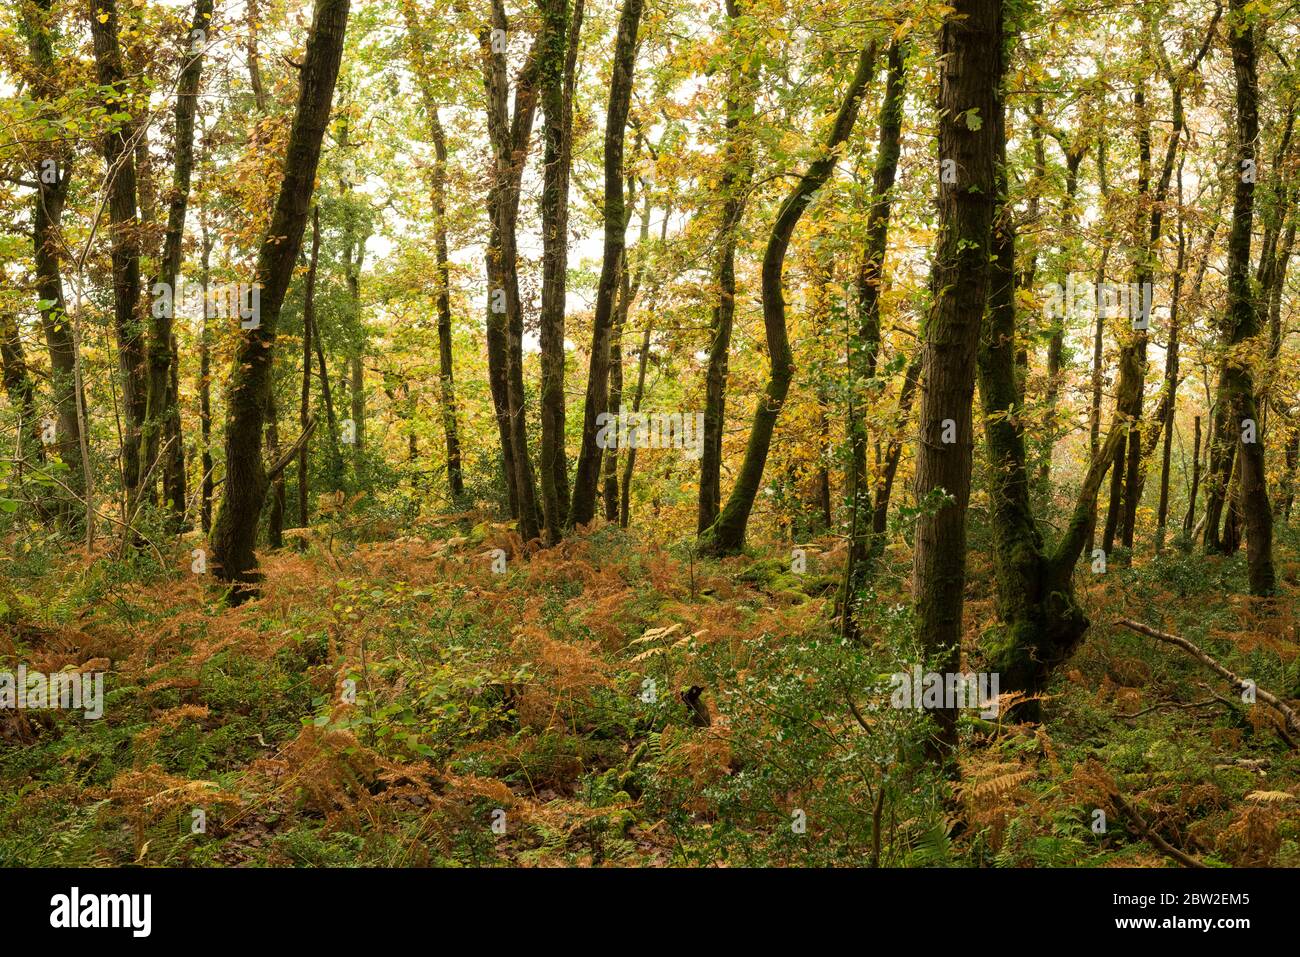 Yearnor Wood along the South West Coast Path in autumn in the Exmoor National Park, Somerset, England. Stock Photo